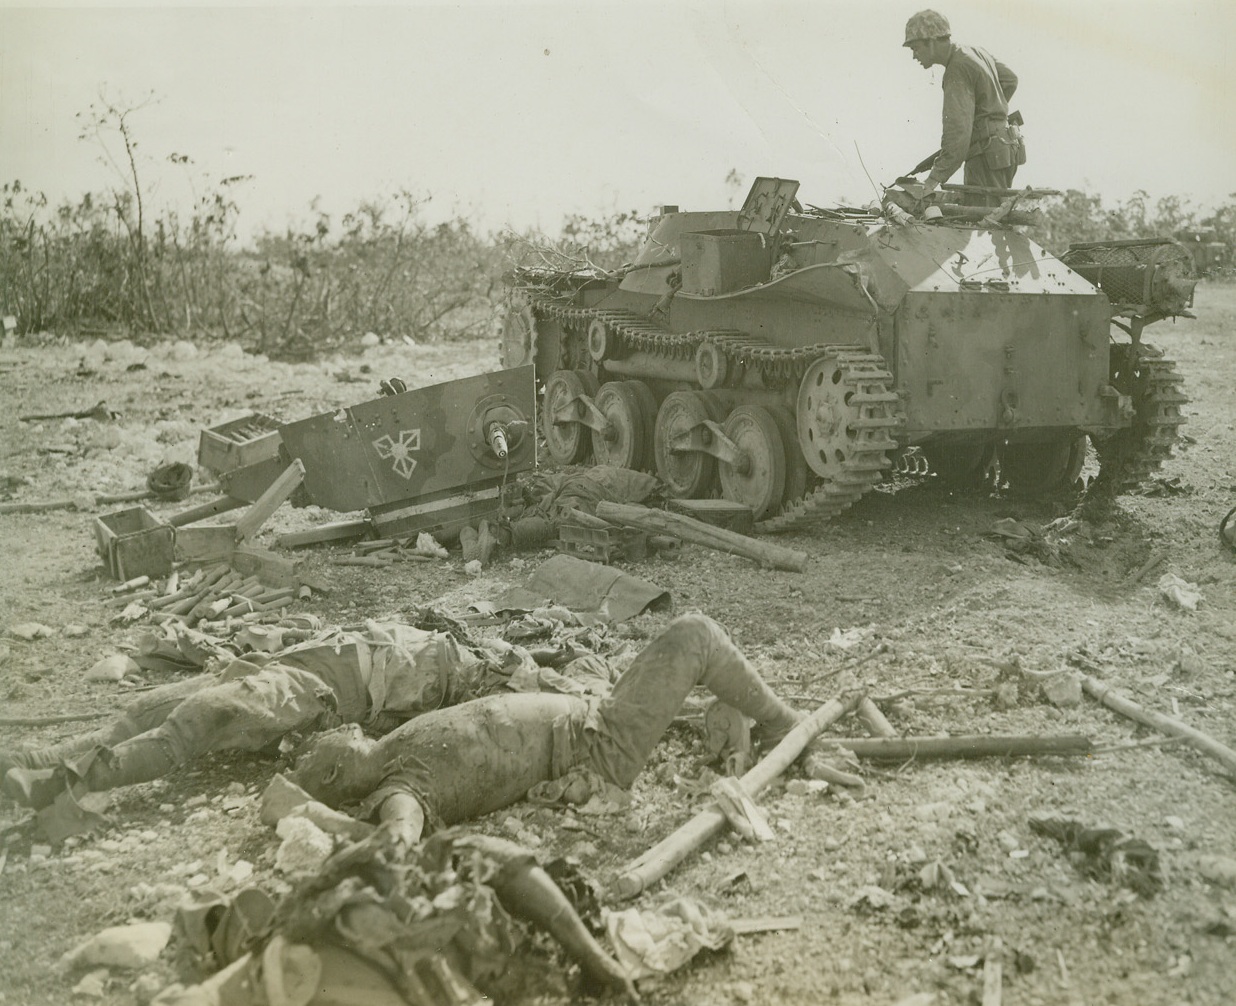 JAP TANKMEN SLAIN IN BLOODY ARMOR BATTLE, 9/24/1944. PELELIU ISLAND—These dead Japs sprawl before their tank, knocked out of the war forever by accurate shooting of Marine tankmen near Peleliu airport. Eight out of 12 enemy tanks were blasted to bits by one Leatherneck turret gunner, Corp. Edward Brooks of Washington, D.C. Here an alert Marine peers into inside of tank to make sure no survivors are hiding. Photo by Stanley Troutman, Acme Newspictures staff photographer for War Picture Pool. Credit Line (ACME);